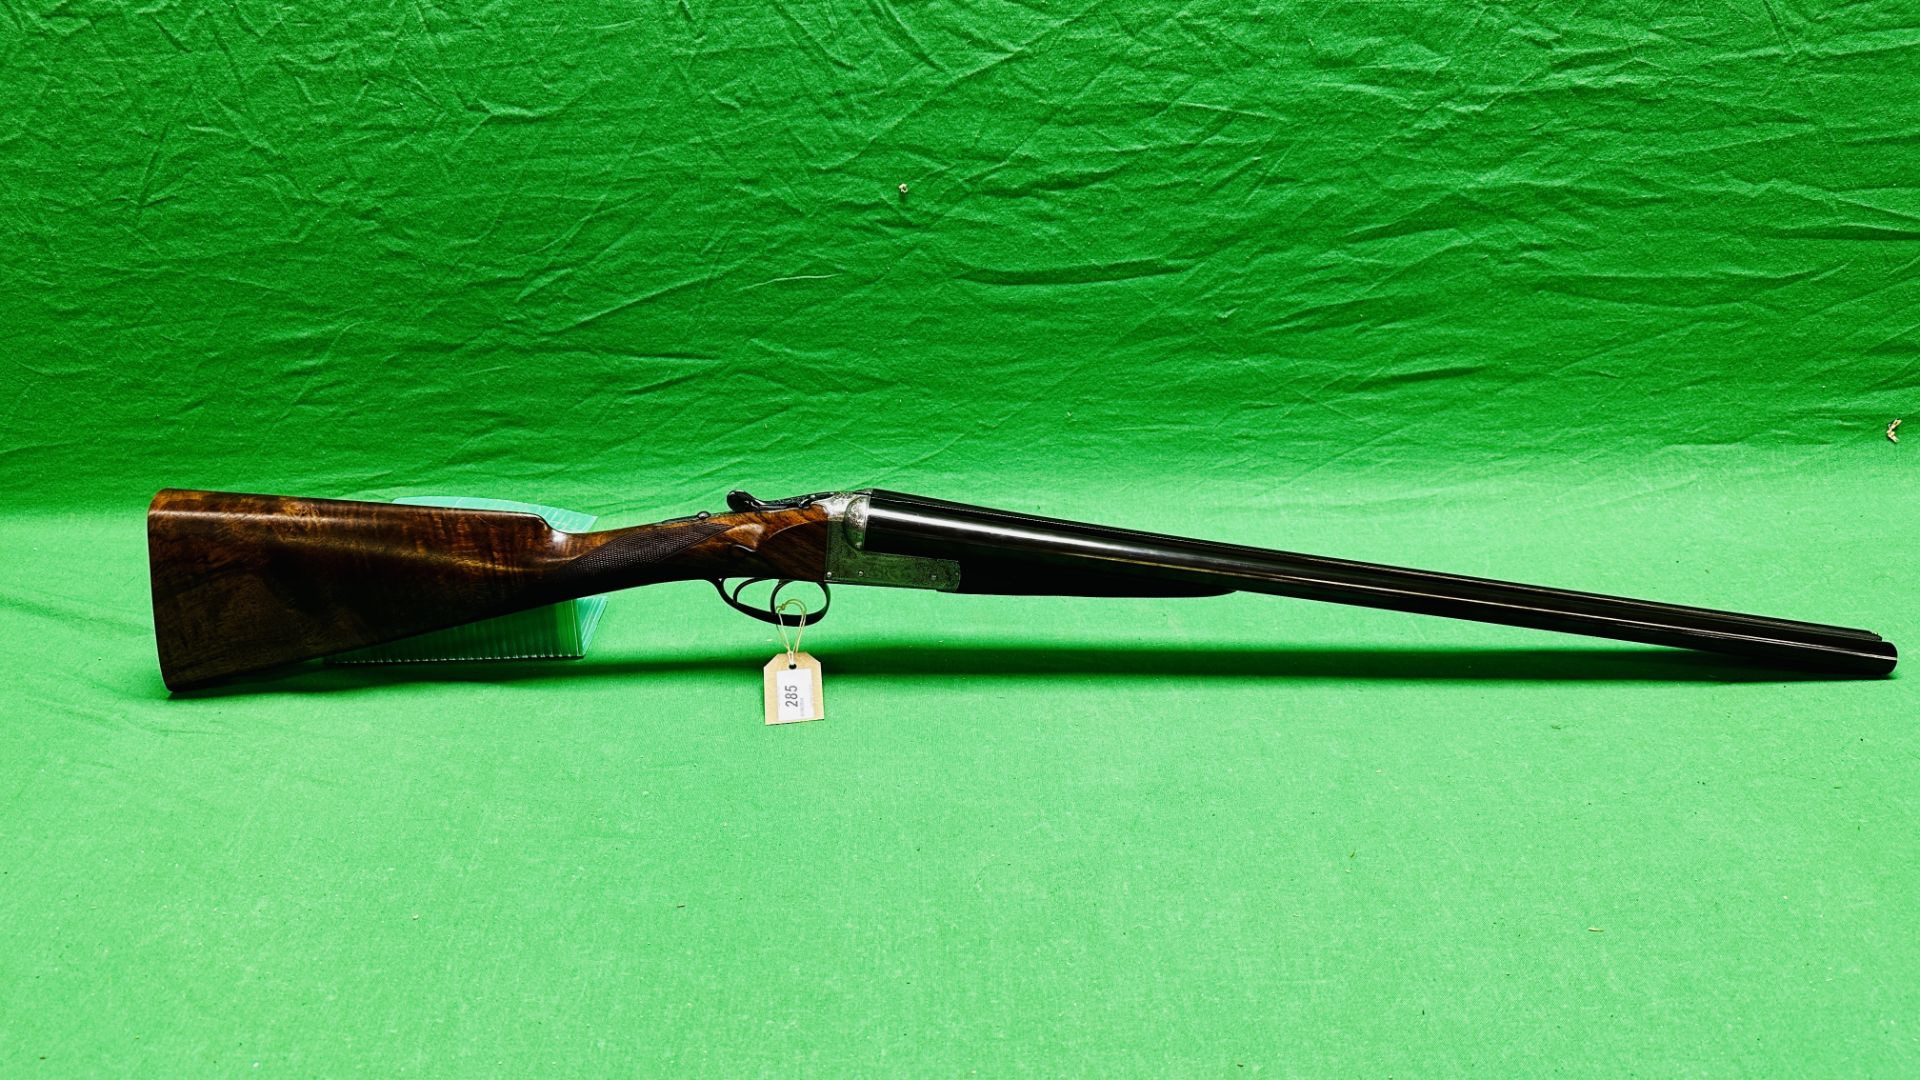 WILLIAM FORD 12 BORE SIDE BY SIDE SHOTGUN #10200, 25" BARRELS, SLEEVED, WITH CHURCHILL RIB,